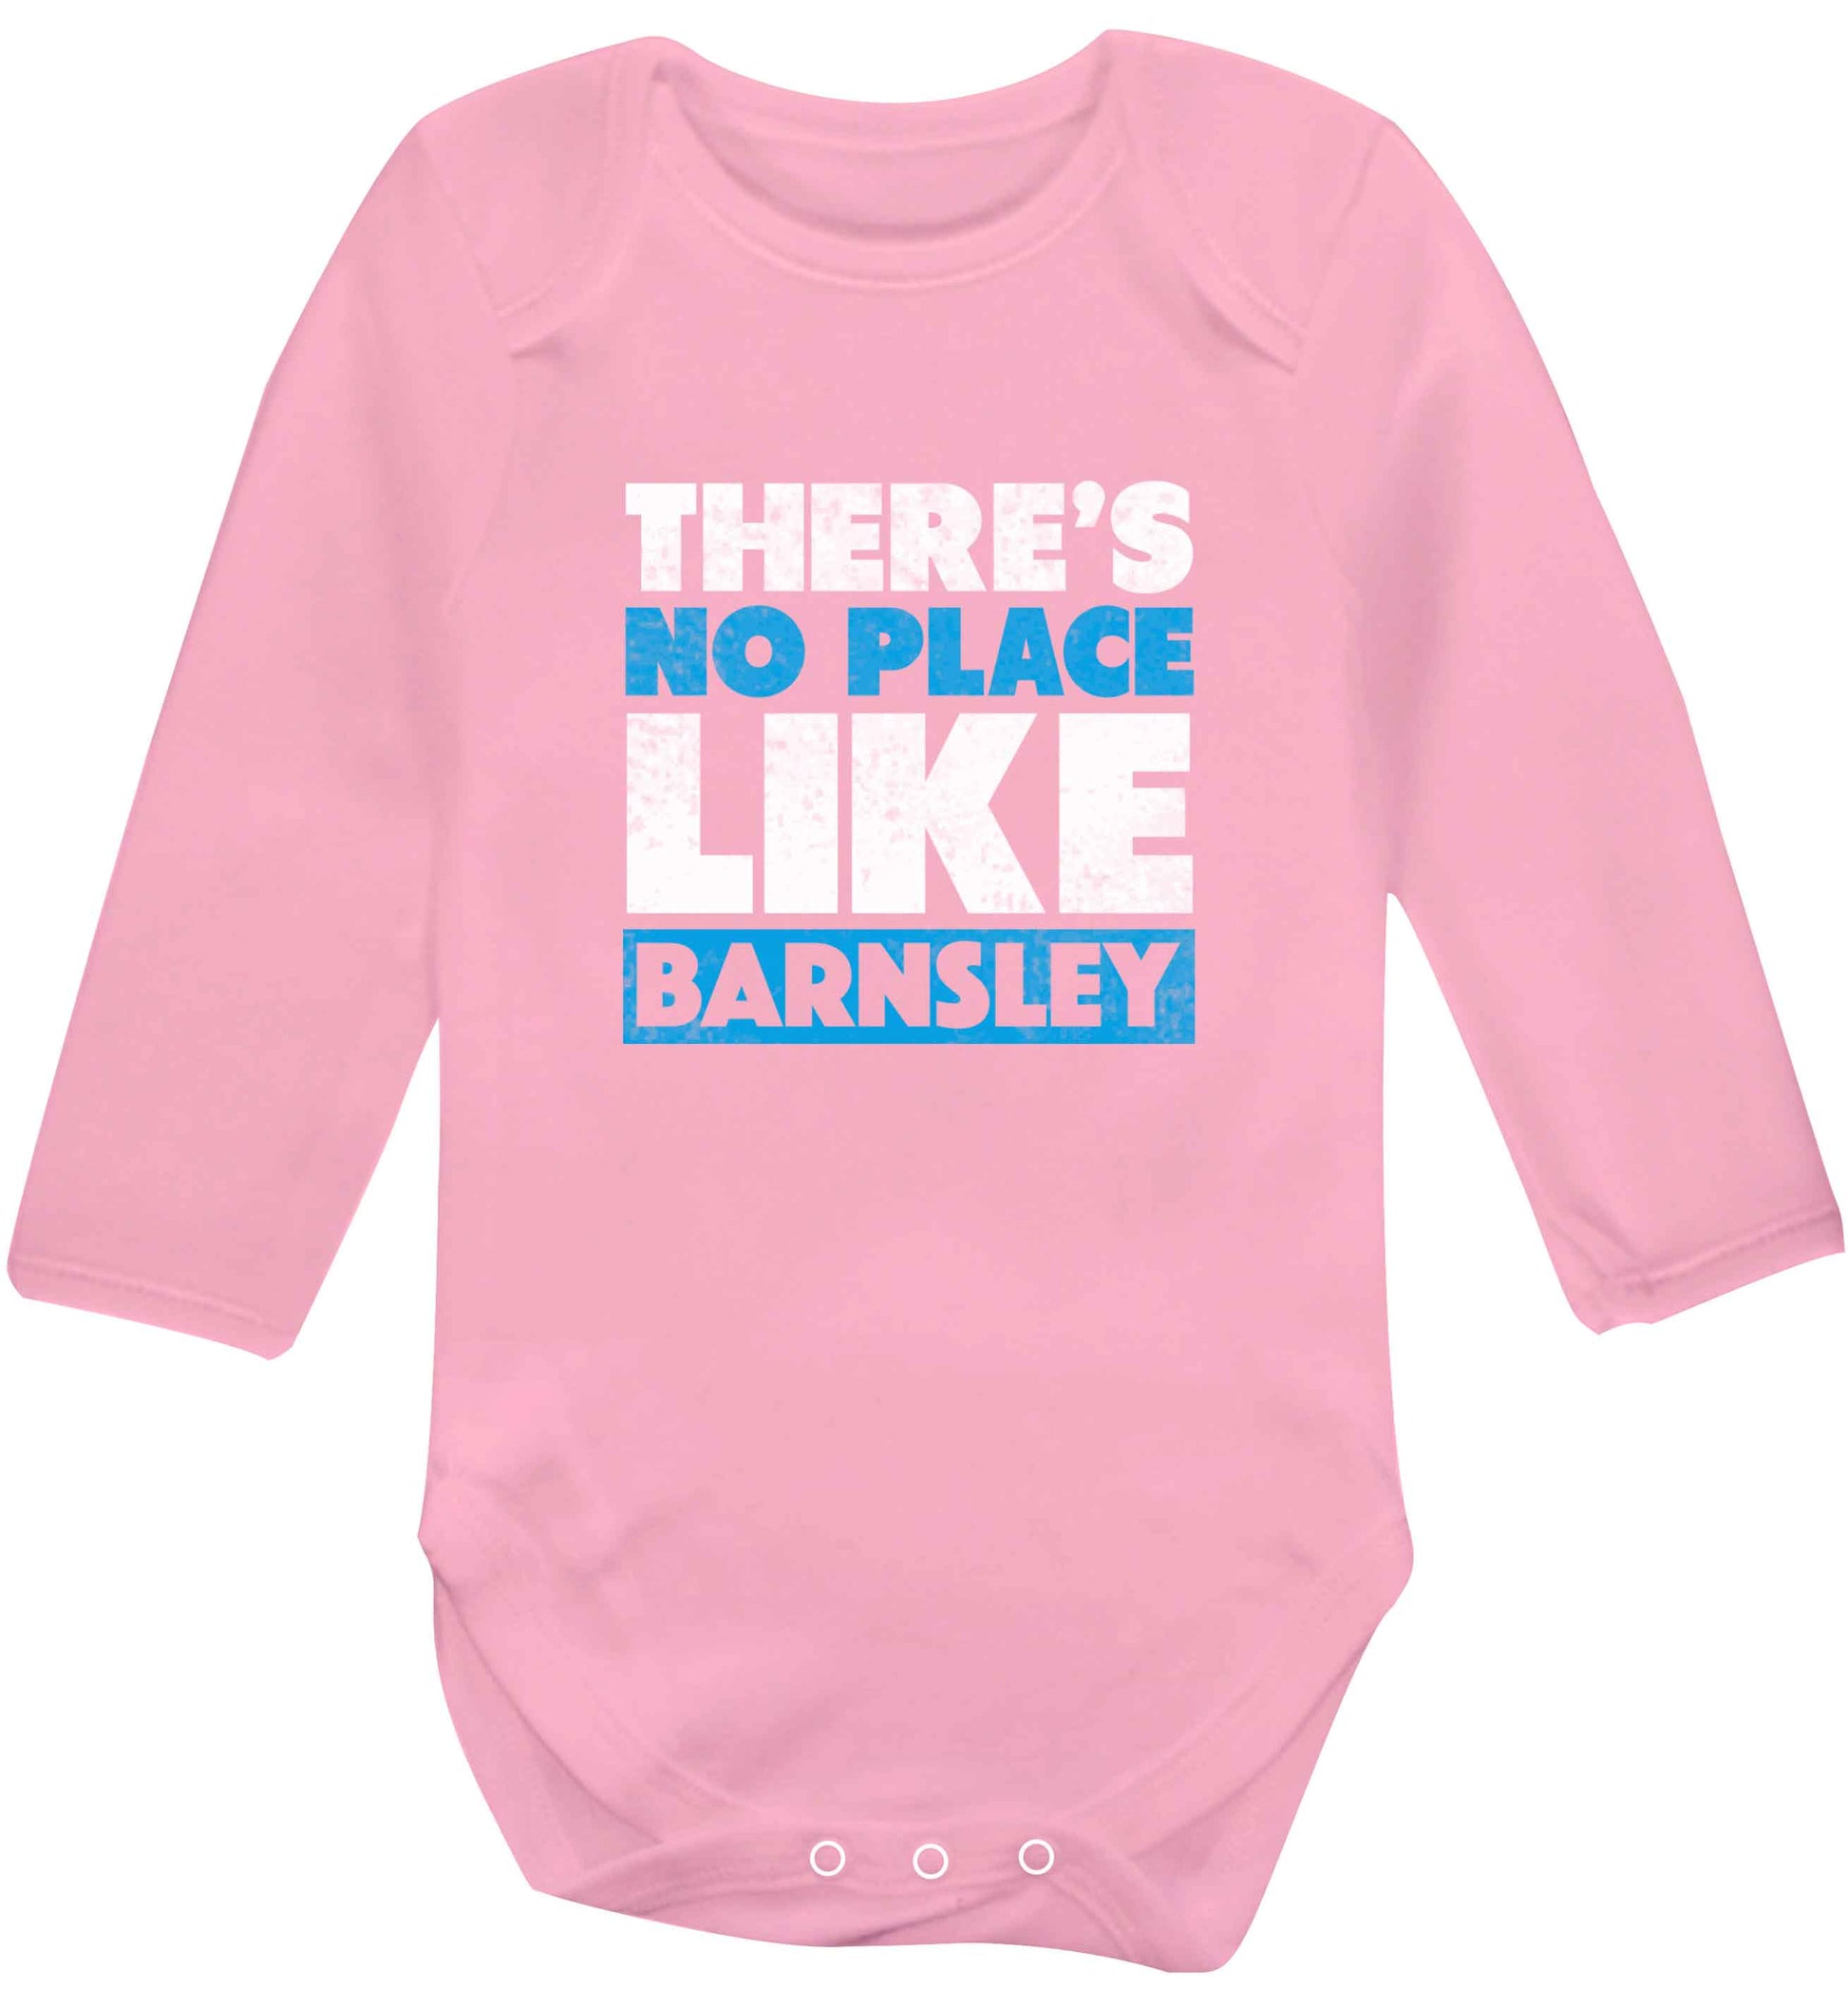 There's No Place Like Barnsley baby vest long sleeved pale pink 6-12 months